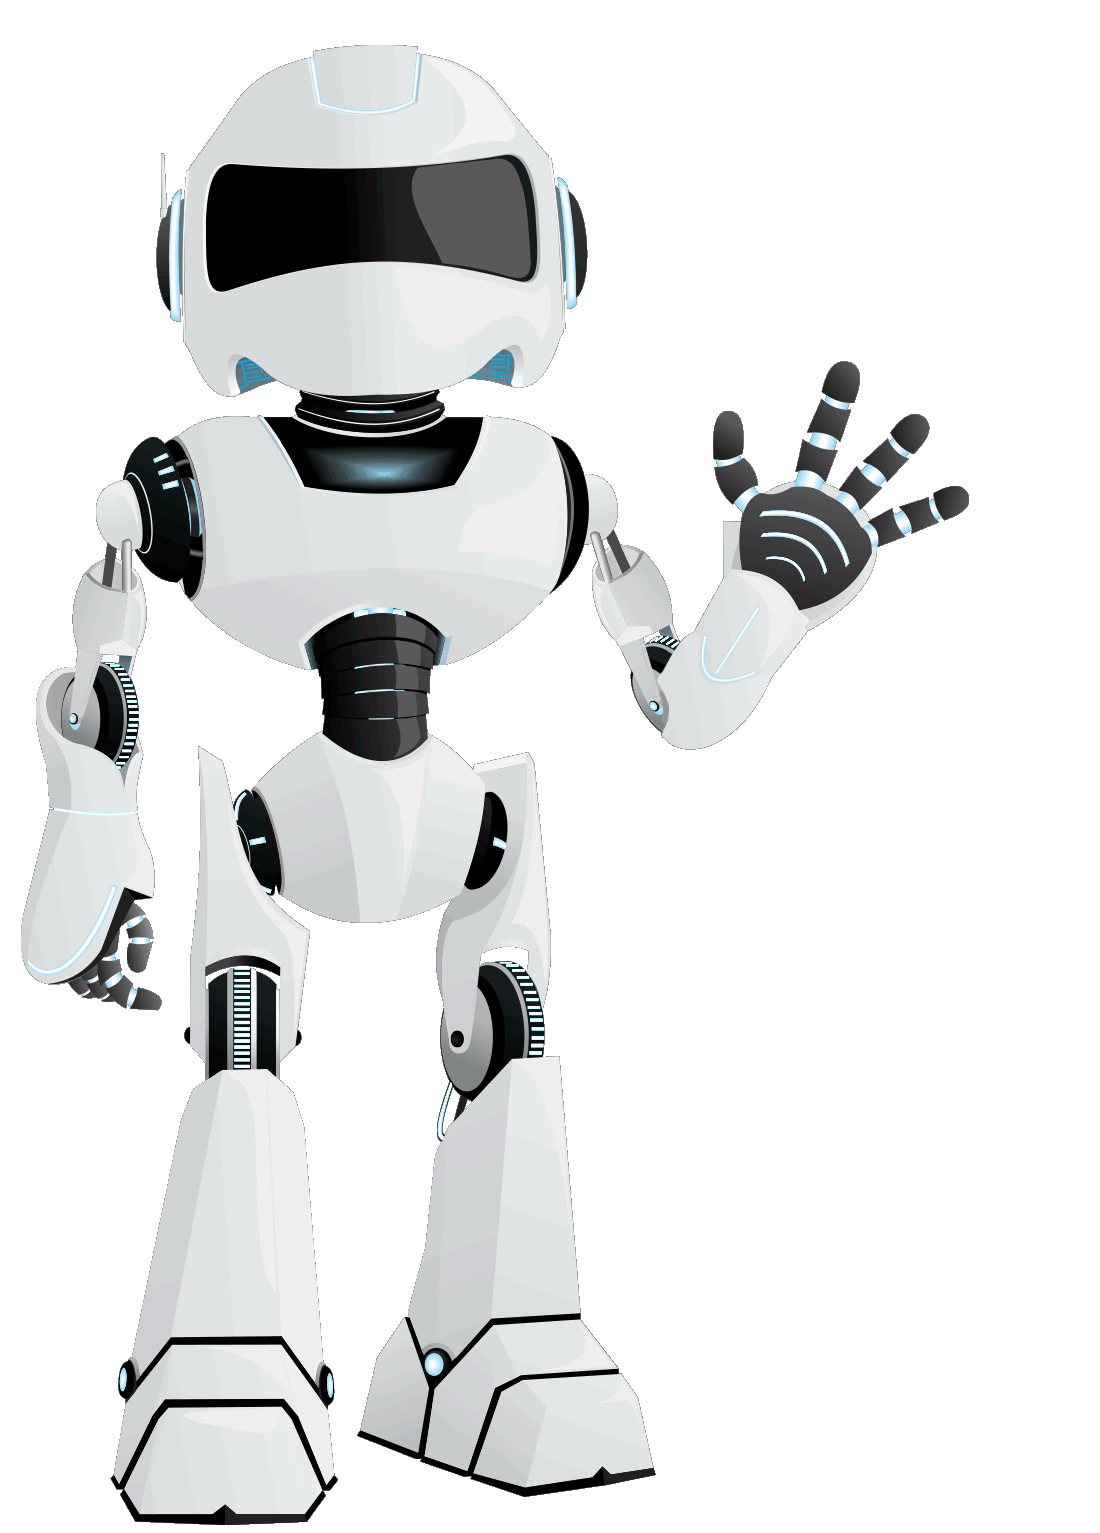 Animated robot pointing to 'SIGN UP HERE' button